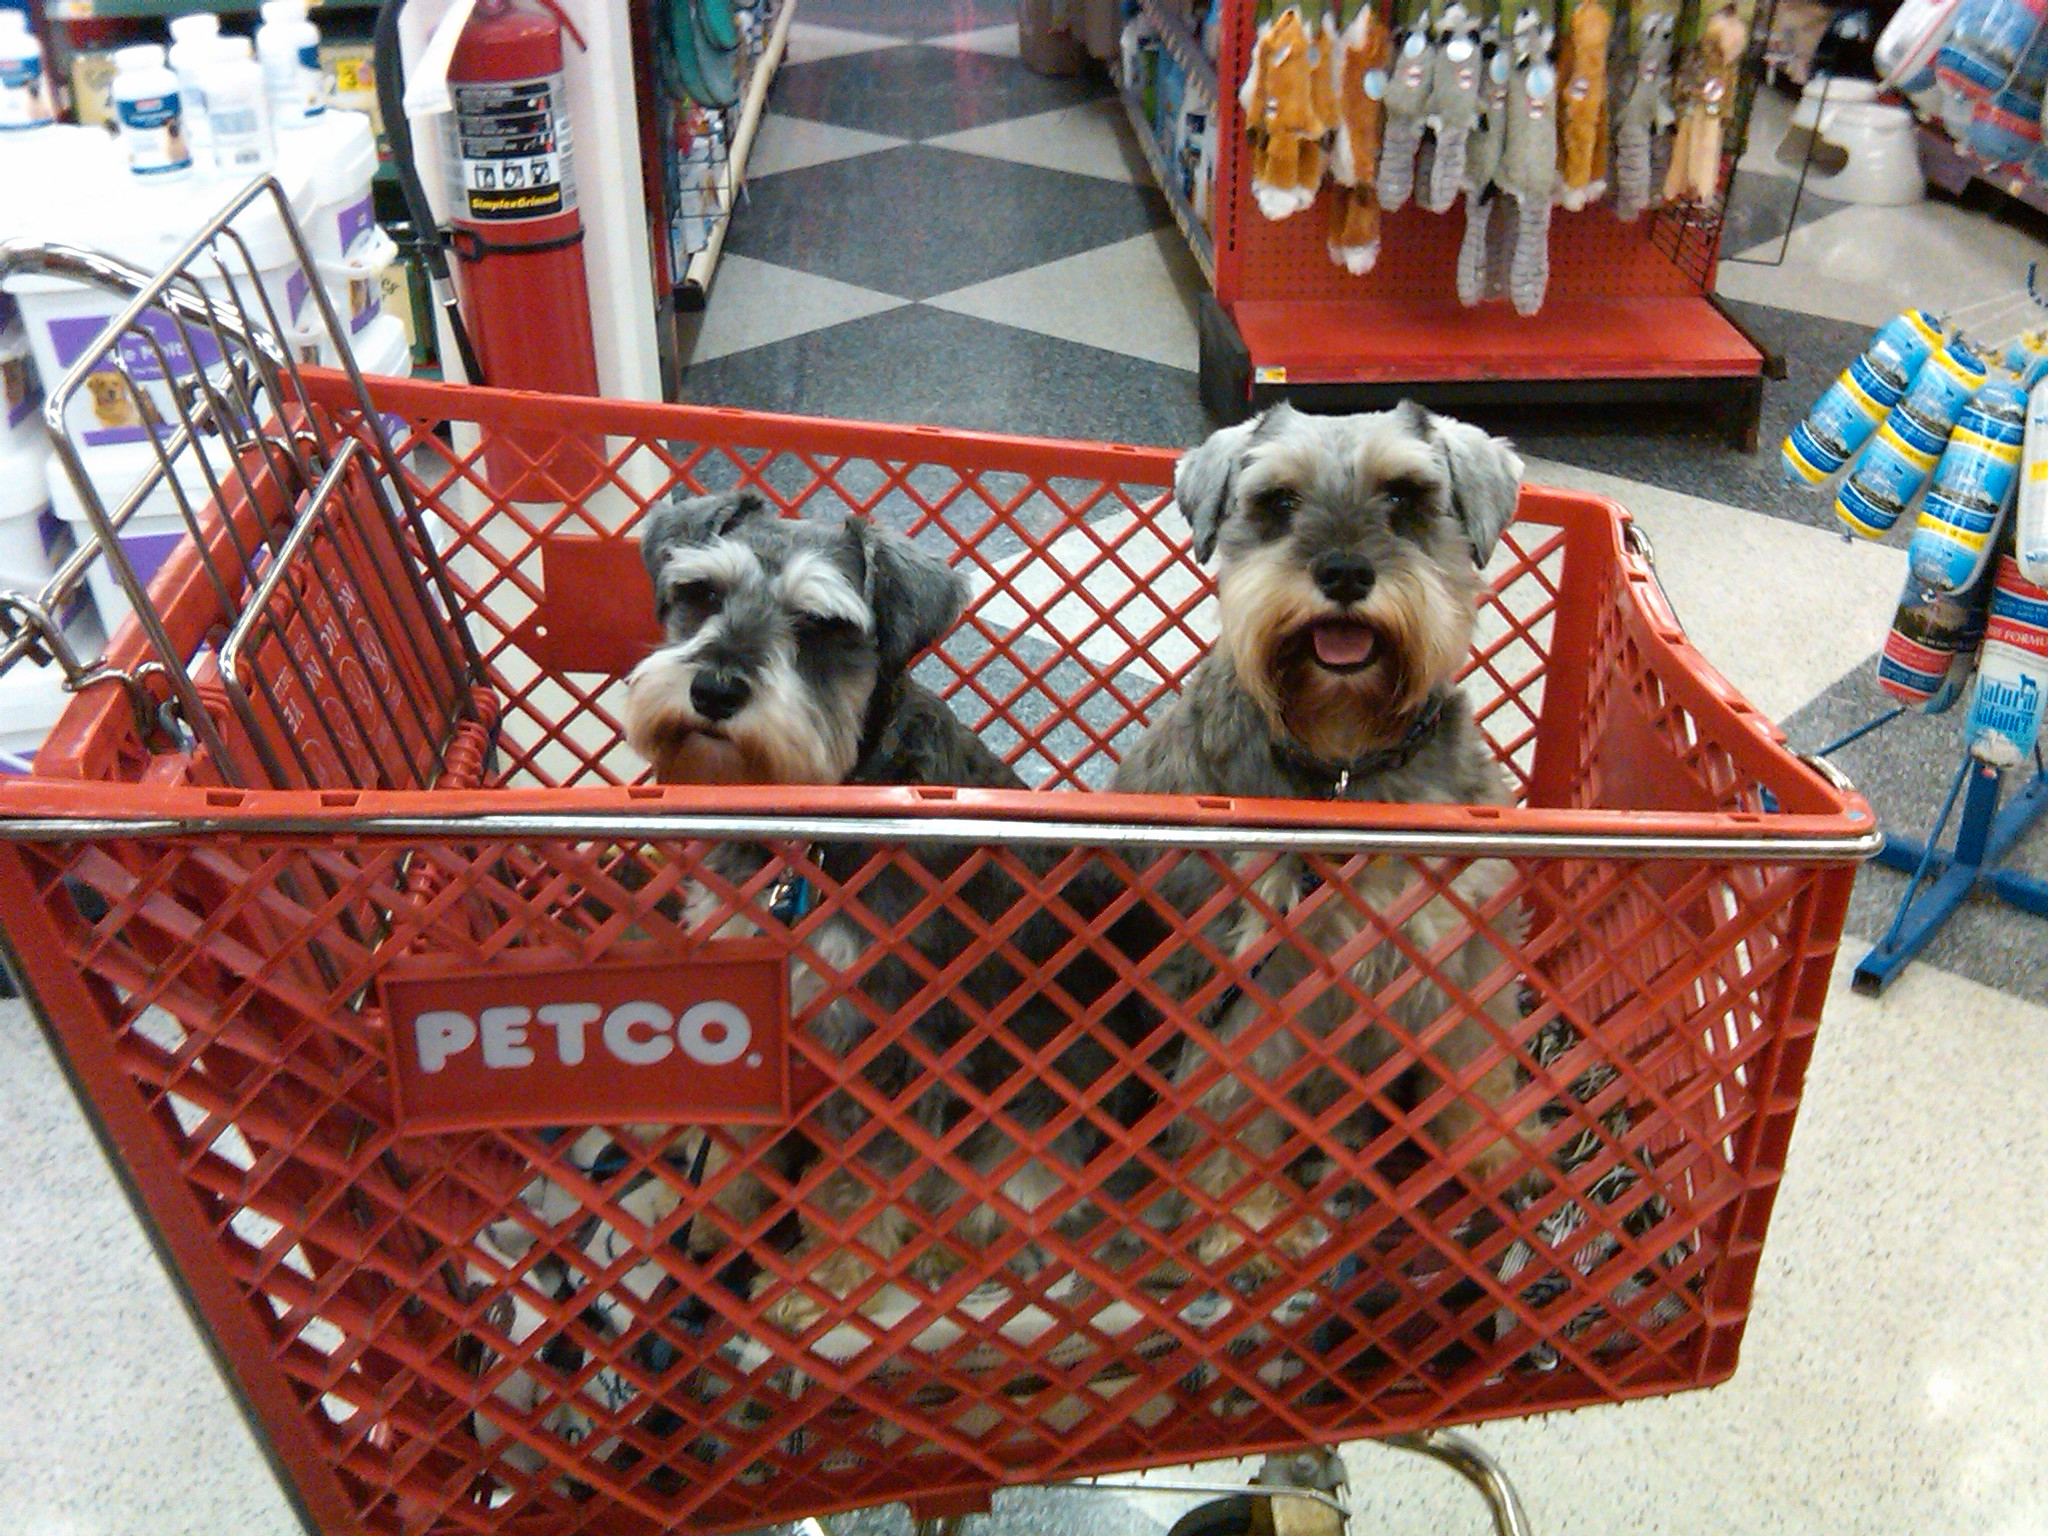 Kate and Casey shopping at Petco in Concord, NH